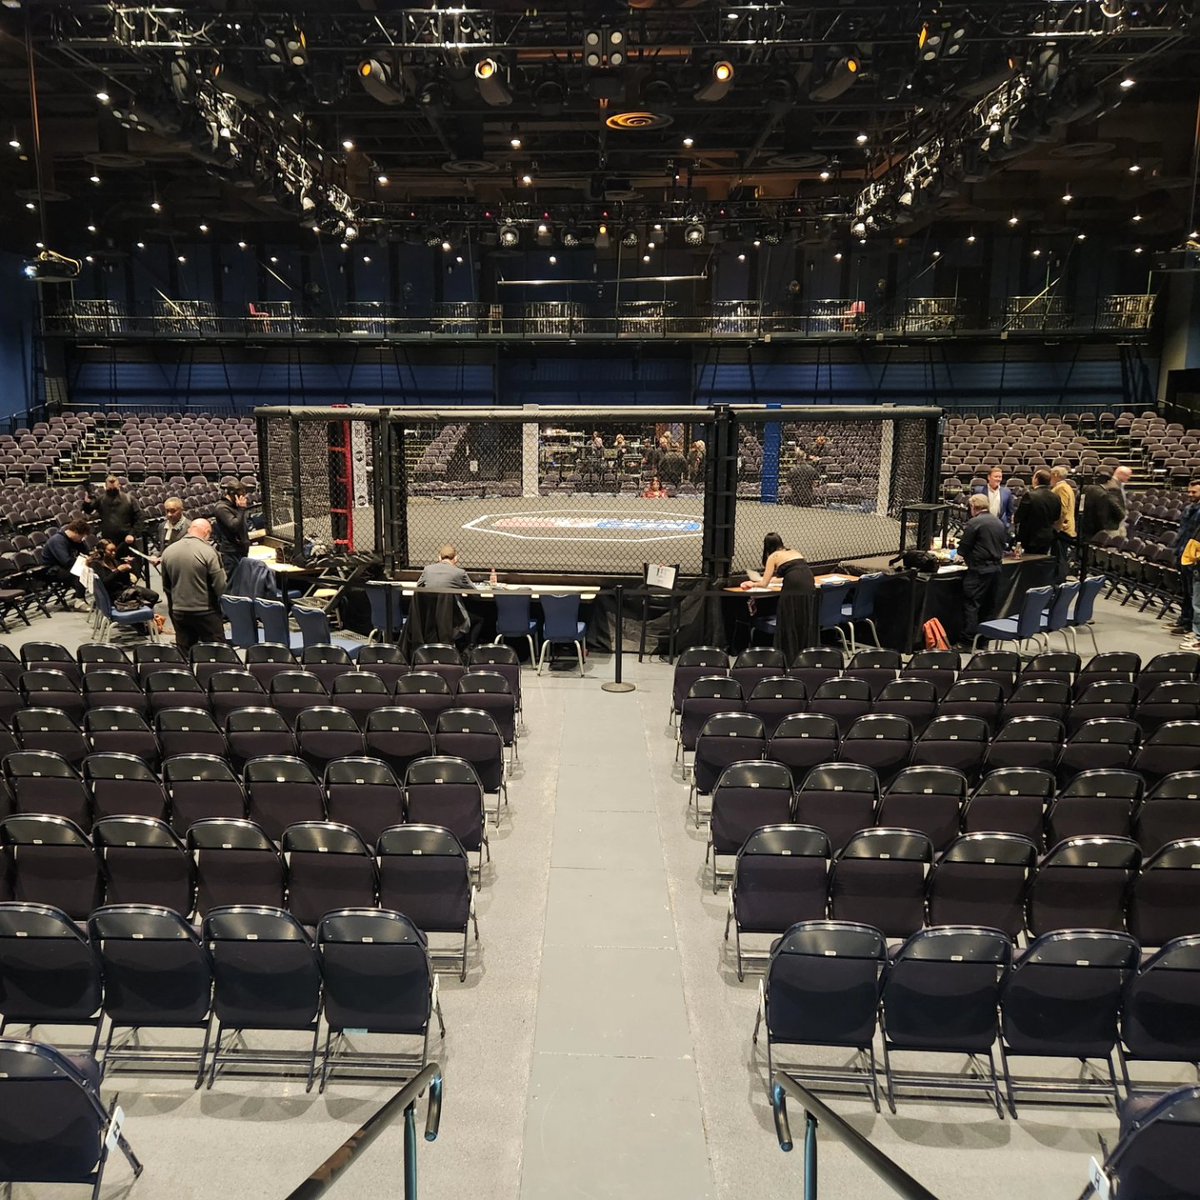 Ready to rock it tonight for round two of back-to-back nights of World Fighting Championships action! It's #WFC165 #MMA LIVE tonight at the @MGMNorthfield Casino! 🎤